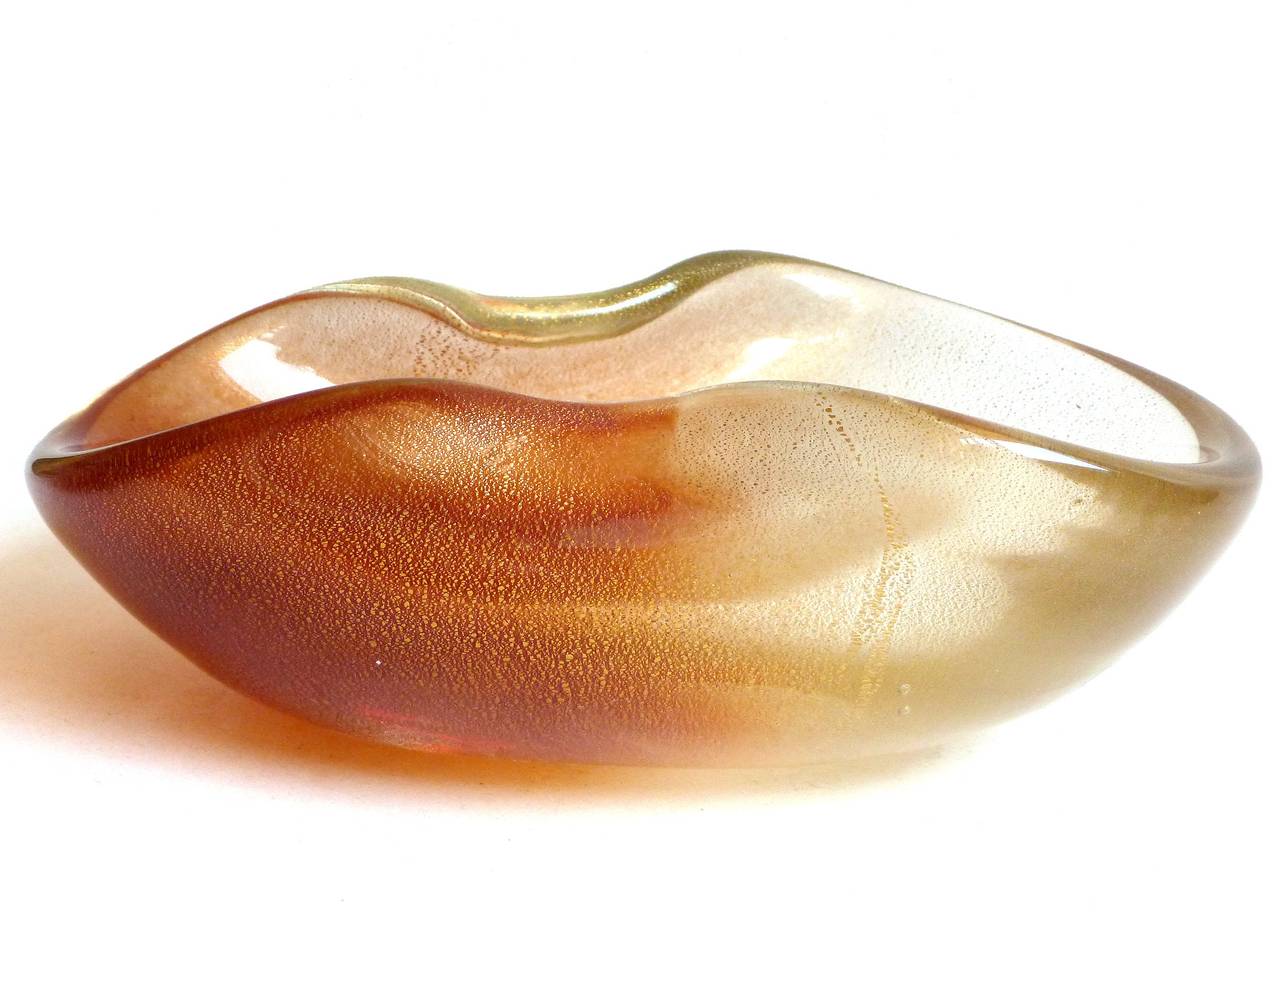 ONLY 1 Left! Beautiful vintage Murano hand blown rust red and gold flecks Italian art glass bowl. Documented to designer Archimede Seguso, circa 1950s. Created with powder pigments, in the 